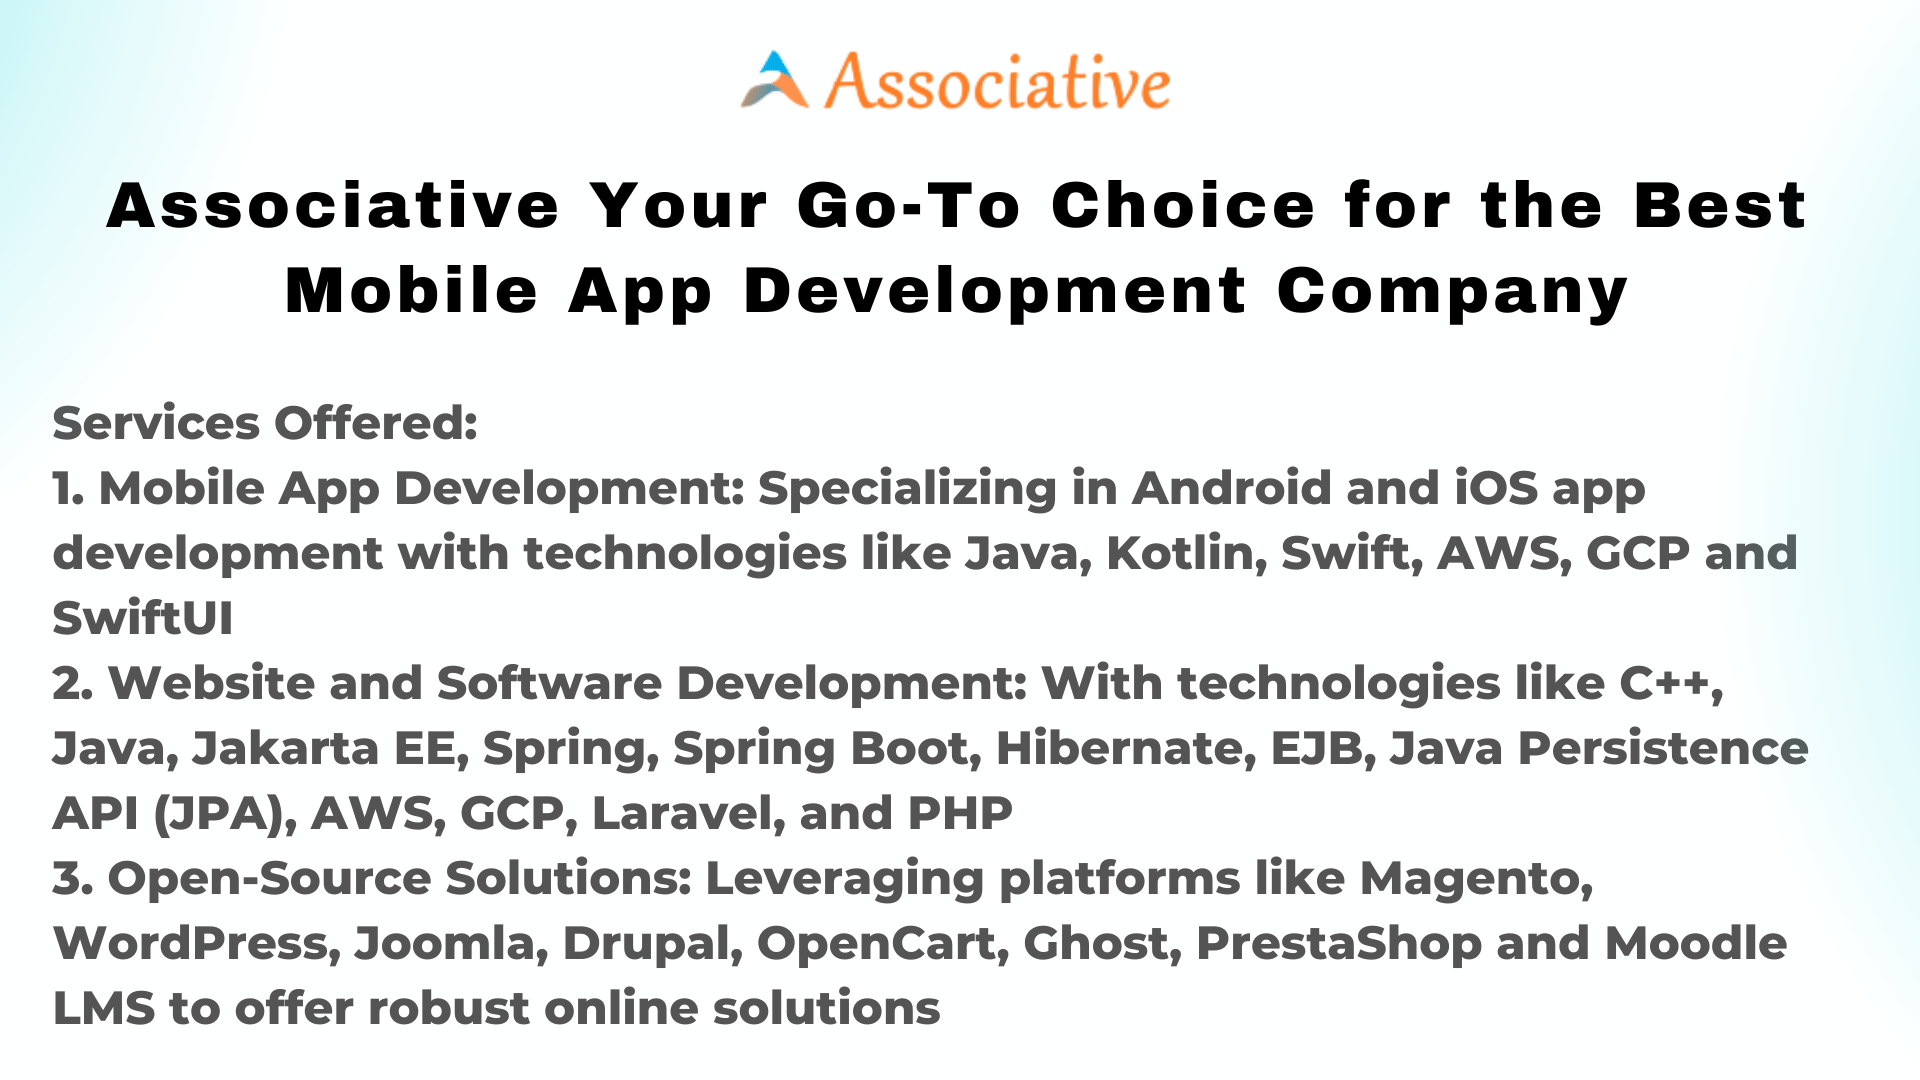 Associative Your Go-To Choice for the Best Mobile App Development Company